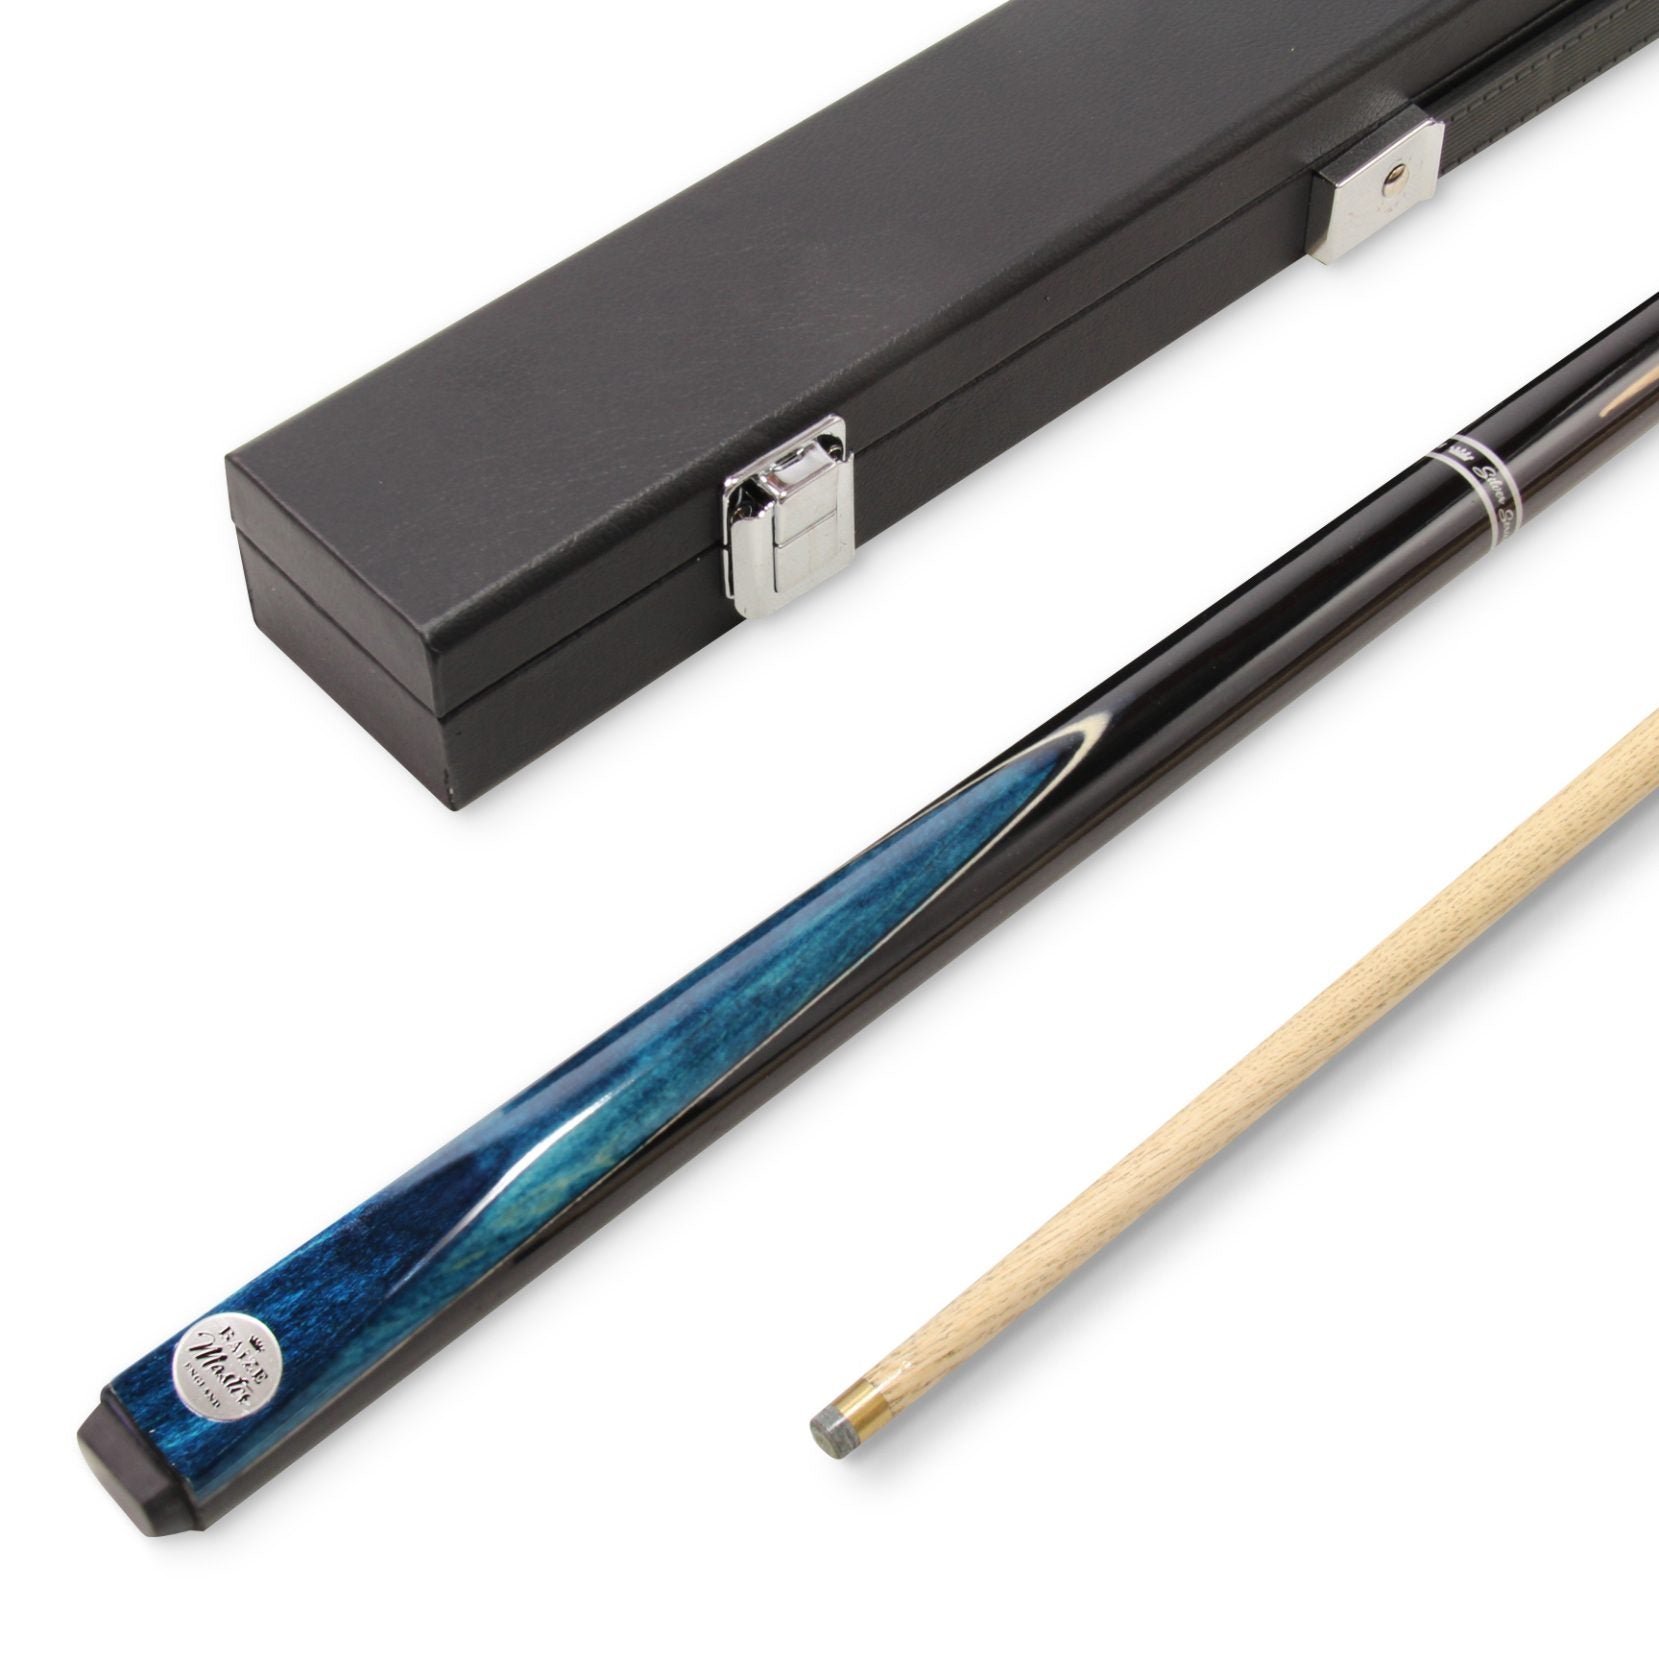 Baize Master Silver Series 48 Inch CONQUEST Junior Kids Short Snooker Pool 2pc Ash Cue Set with MEDIUM BLACK HARD CASE - 9.5mm